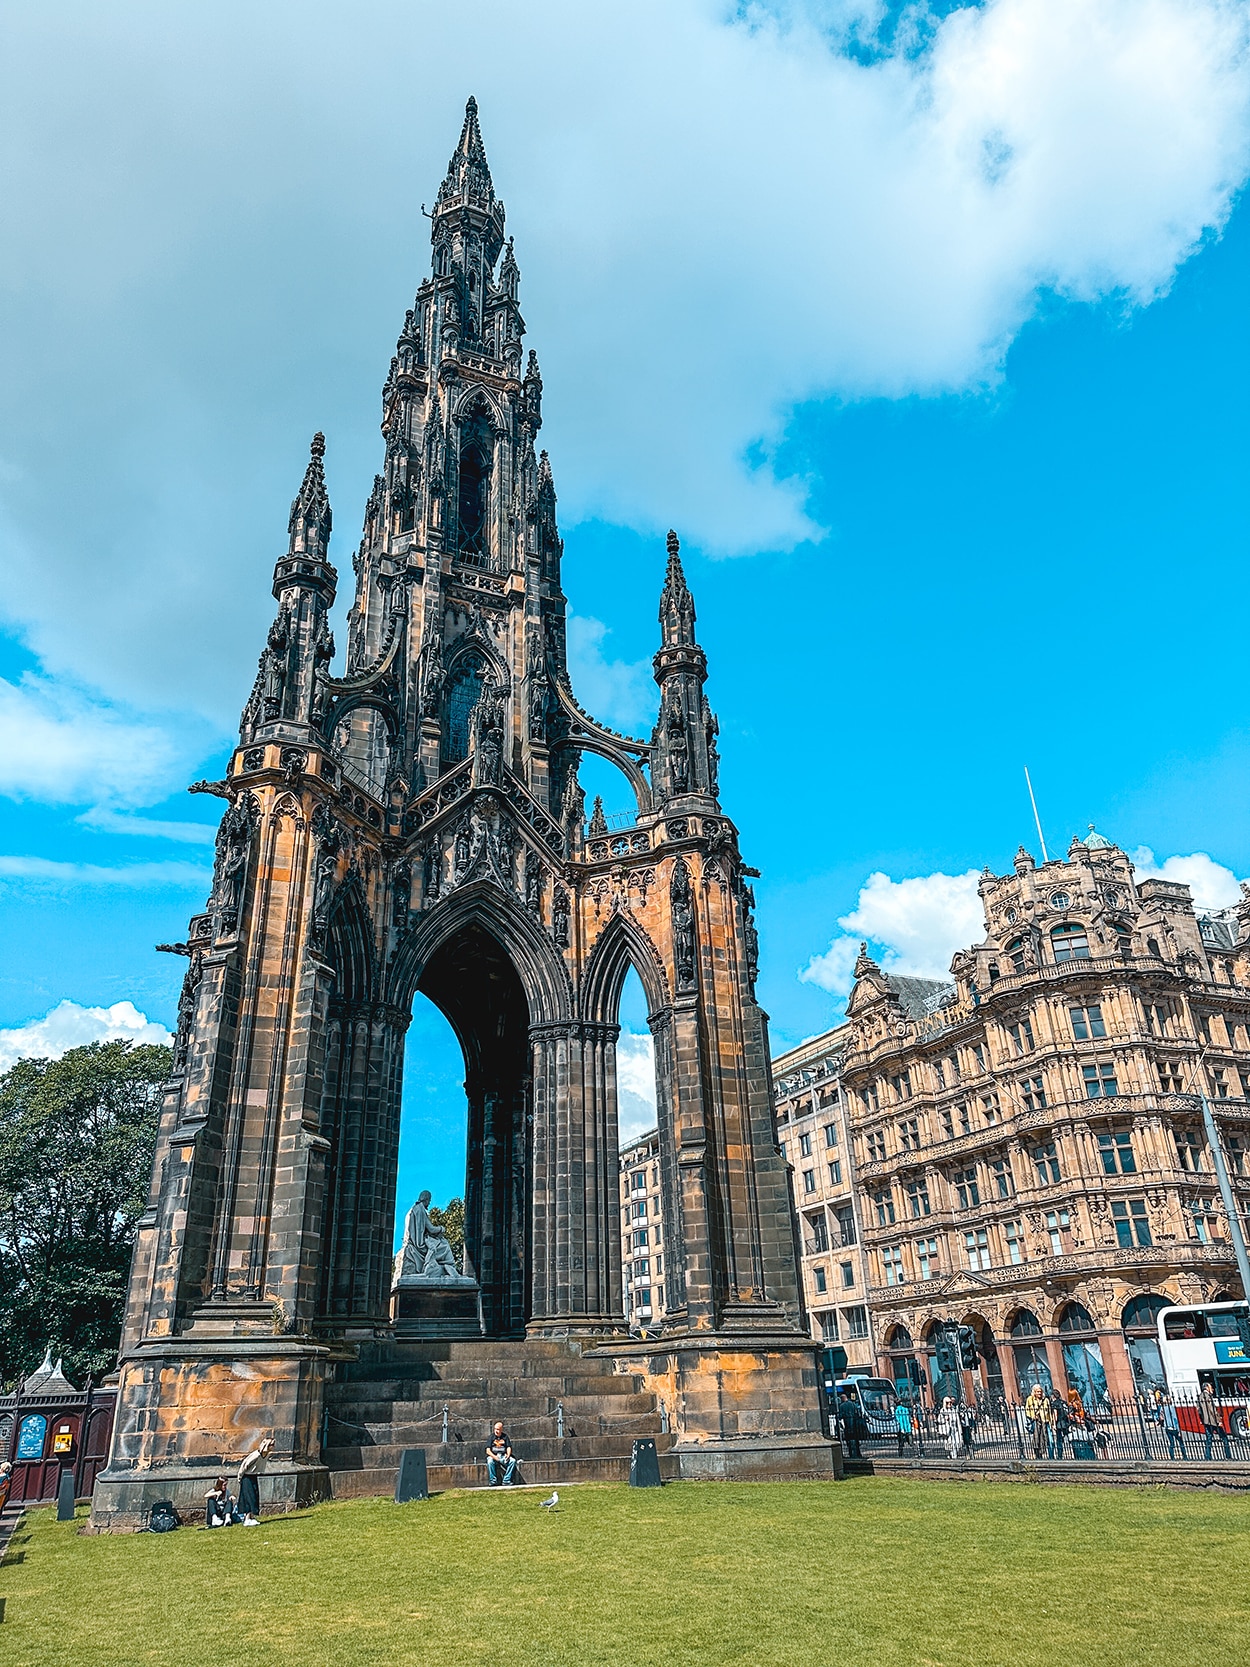 The Scotts Monument in Princes Street Gardens- photo by Keryn Means editor of TwistTravelMag.com